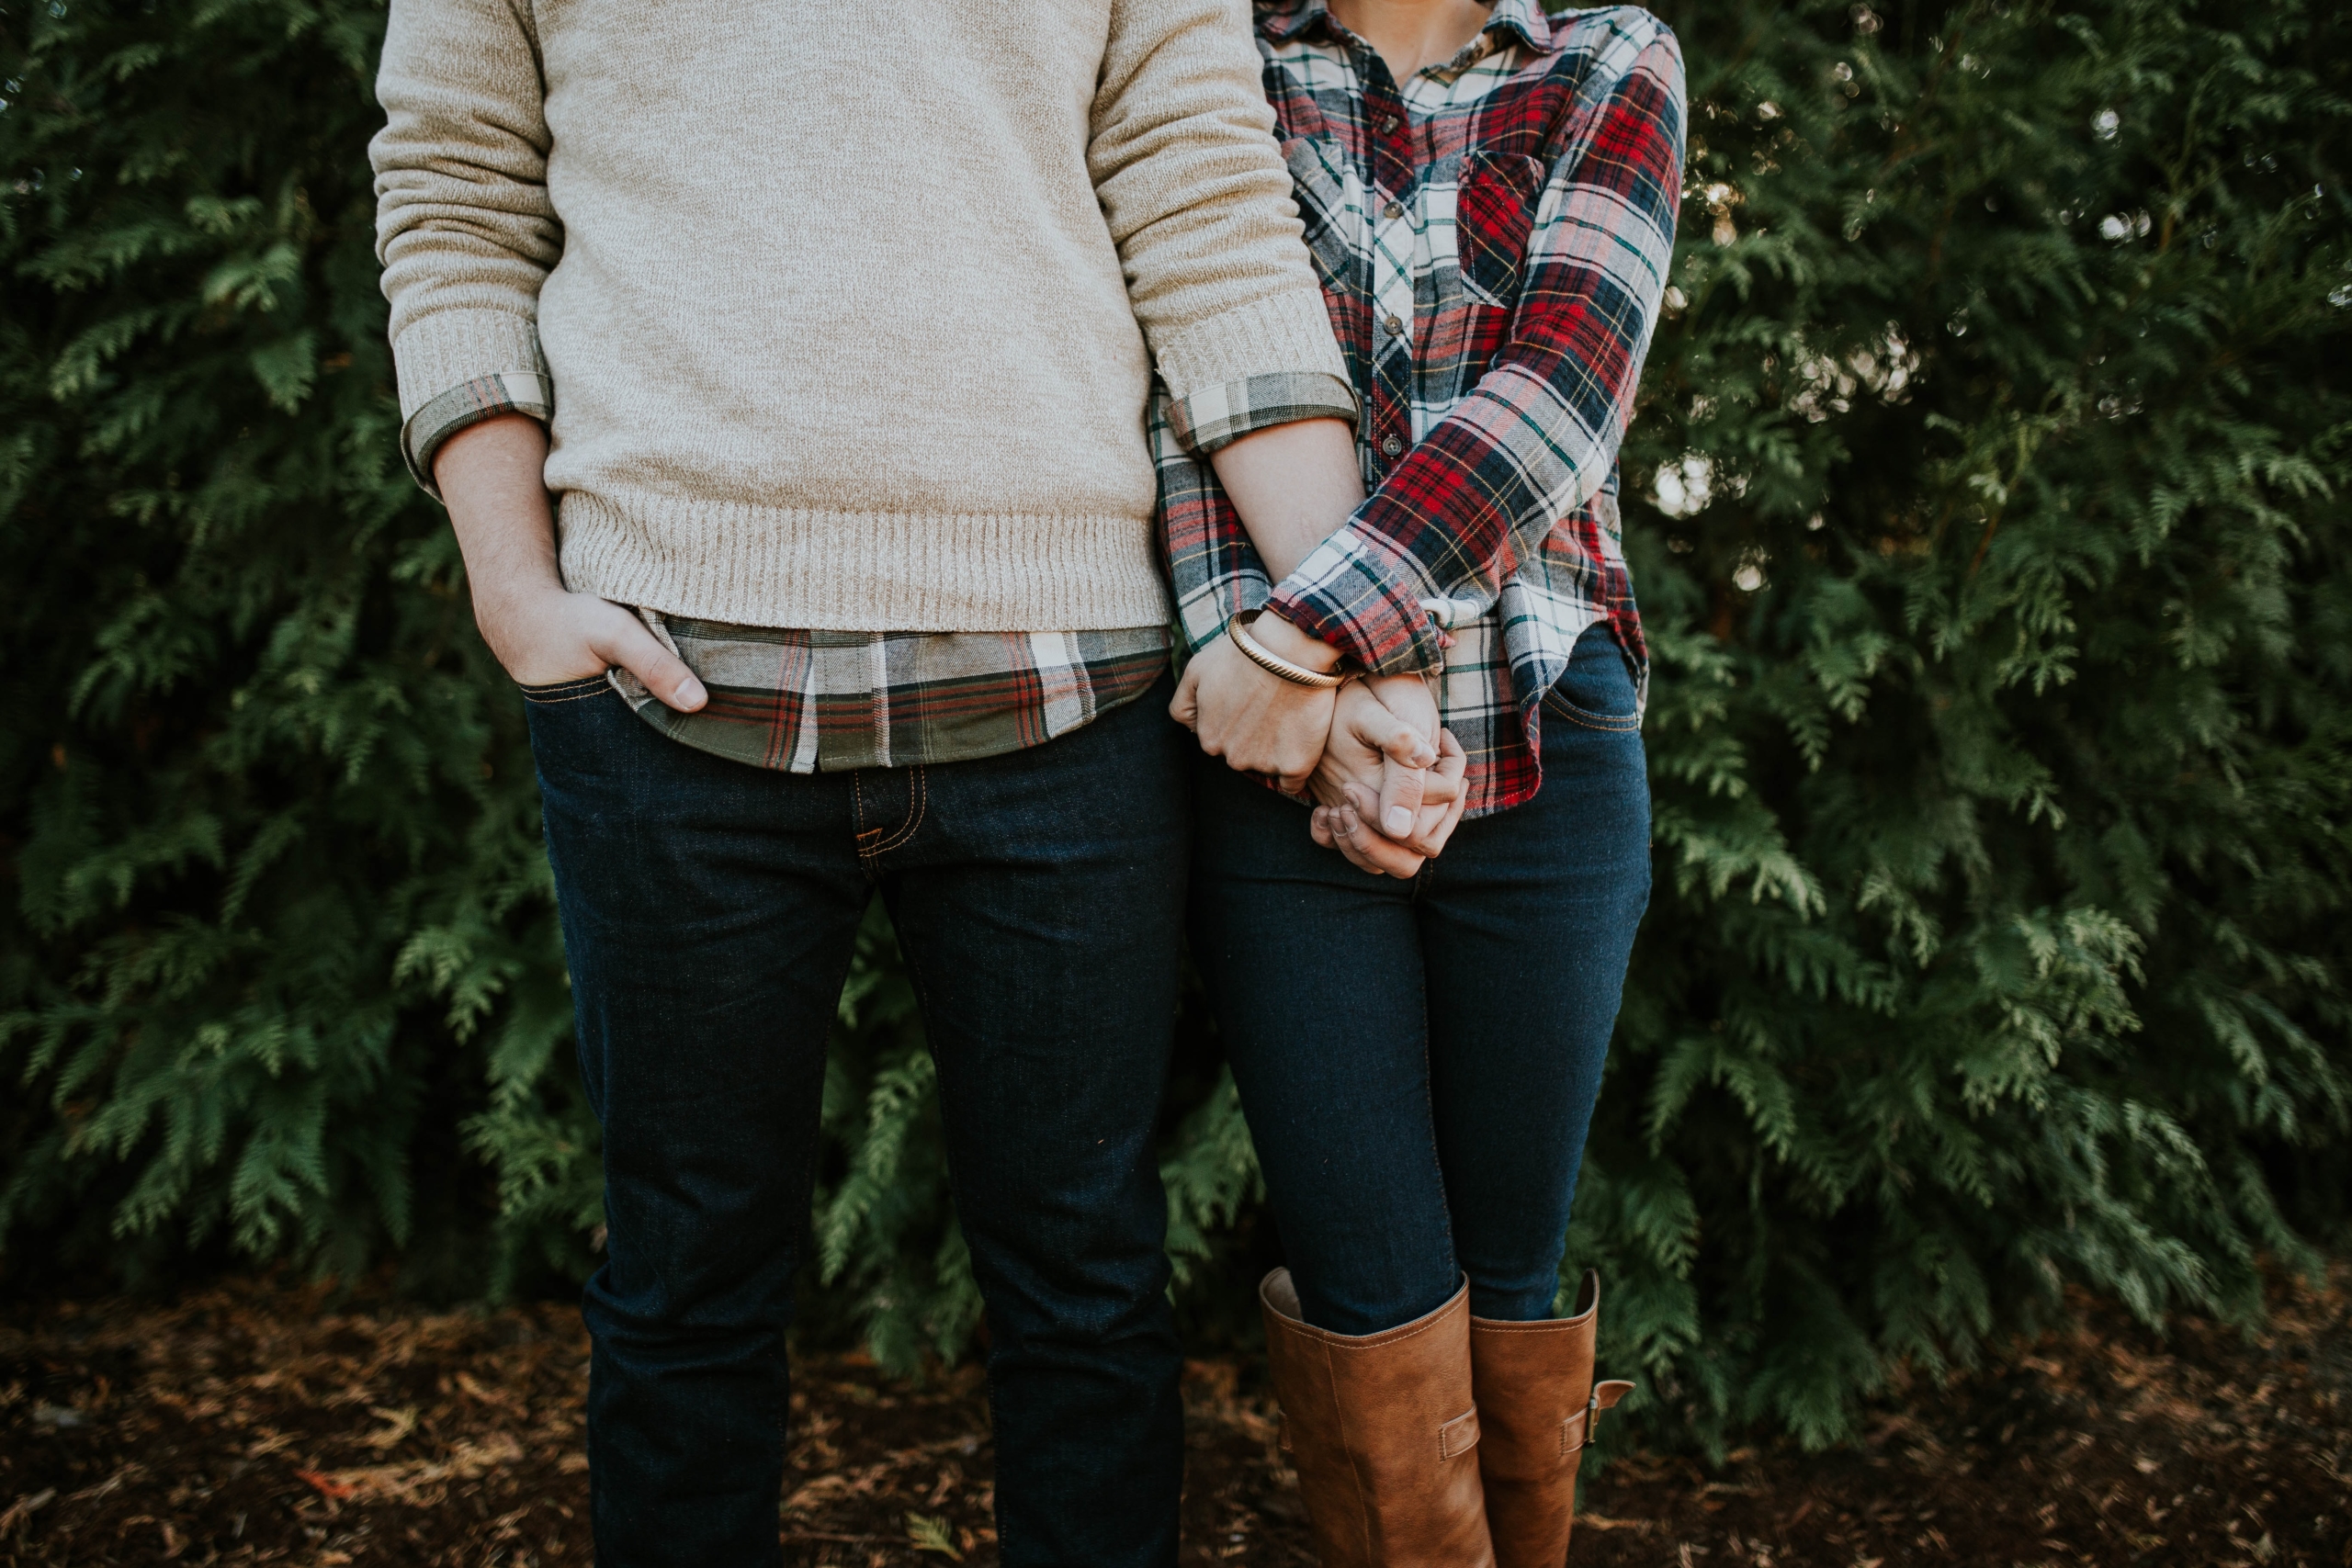 9 Signs of a Codependent Relationship